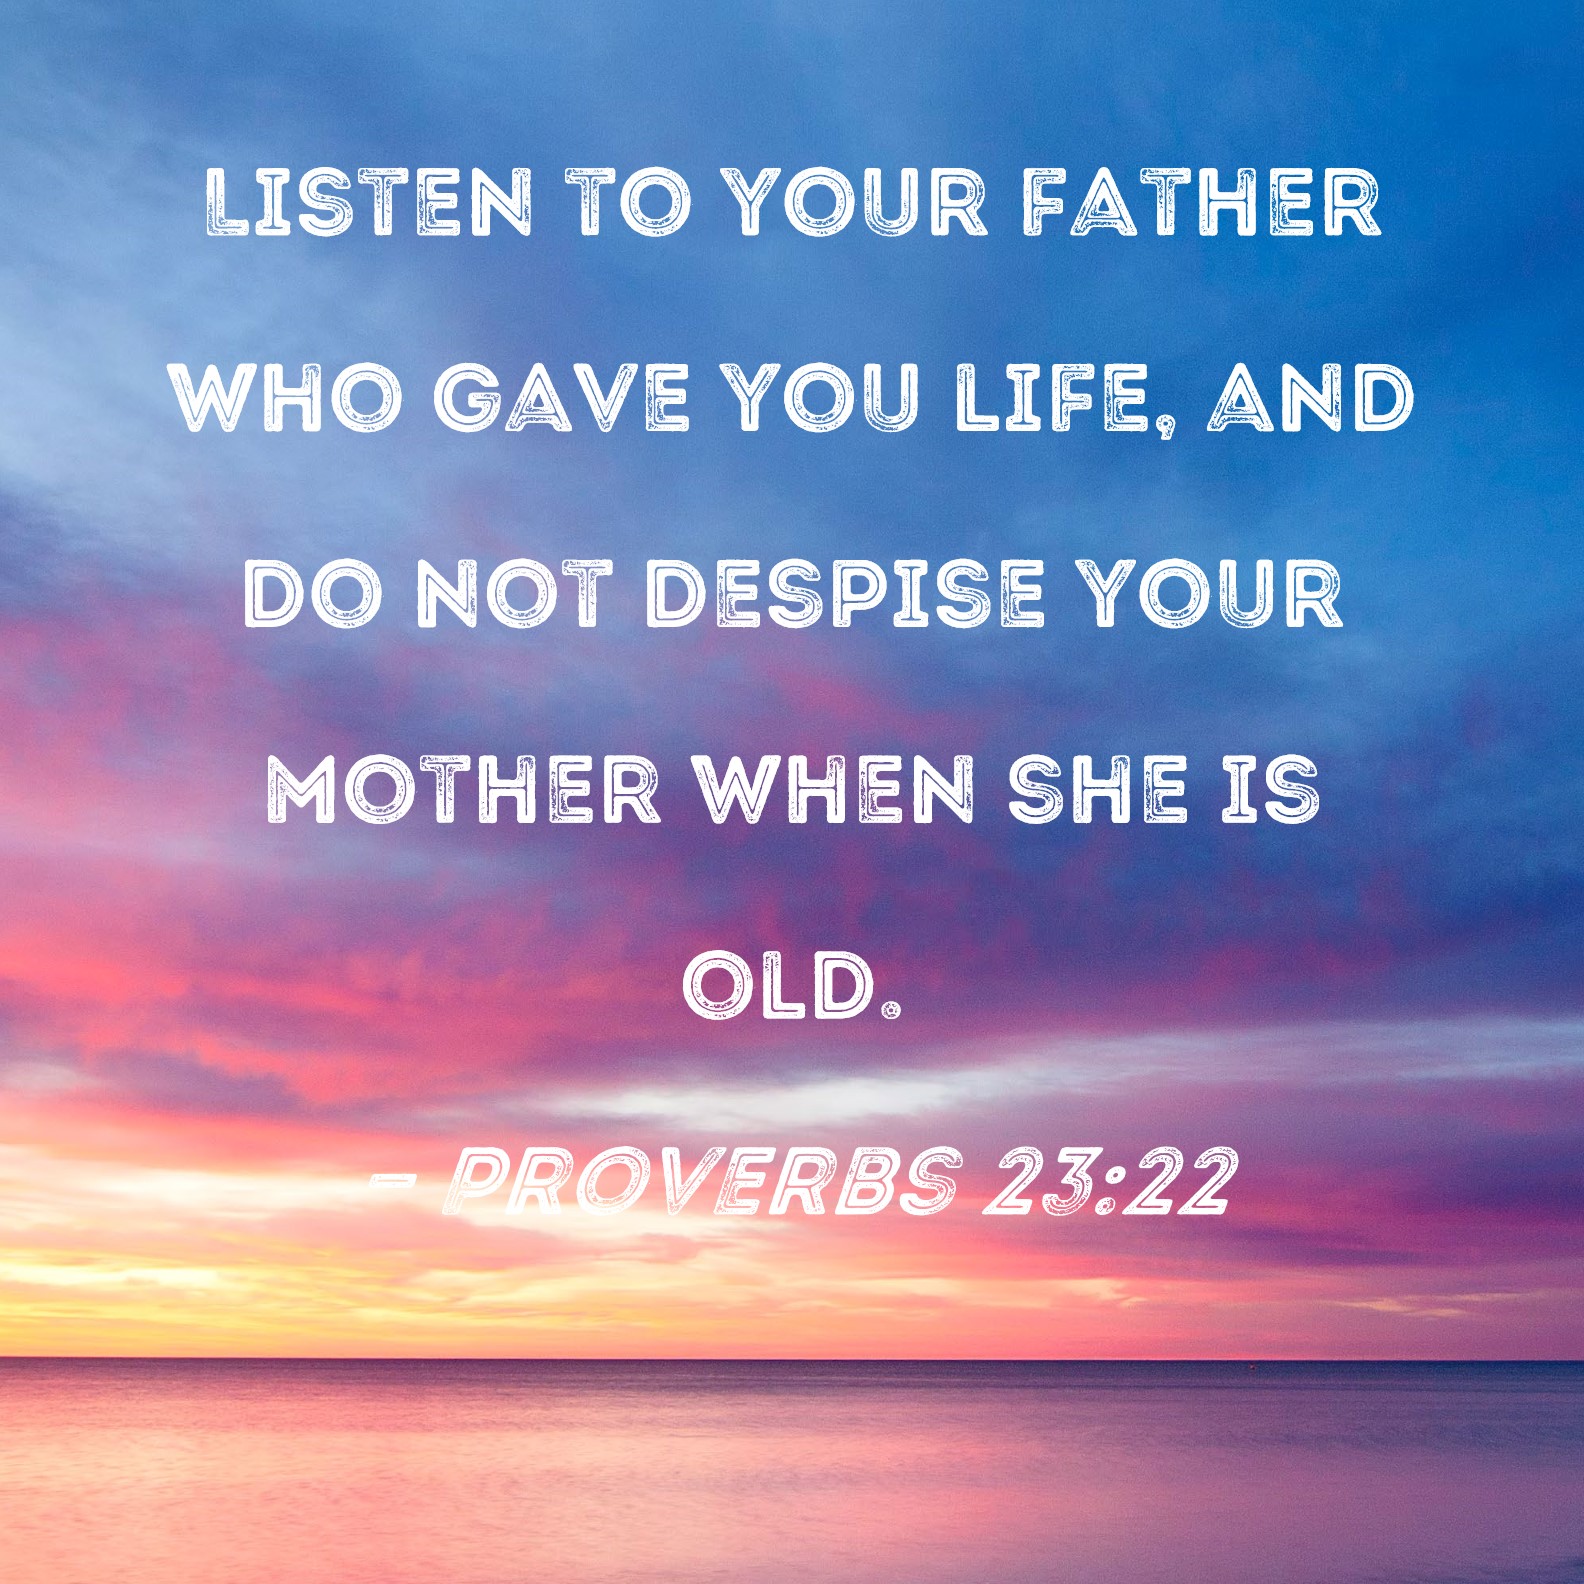 proverbs-23-22-listen-to-your-father-who-gave-you-life-and-do-not